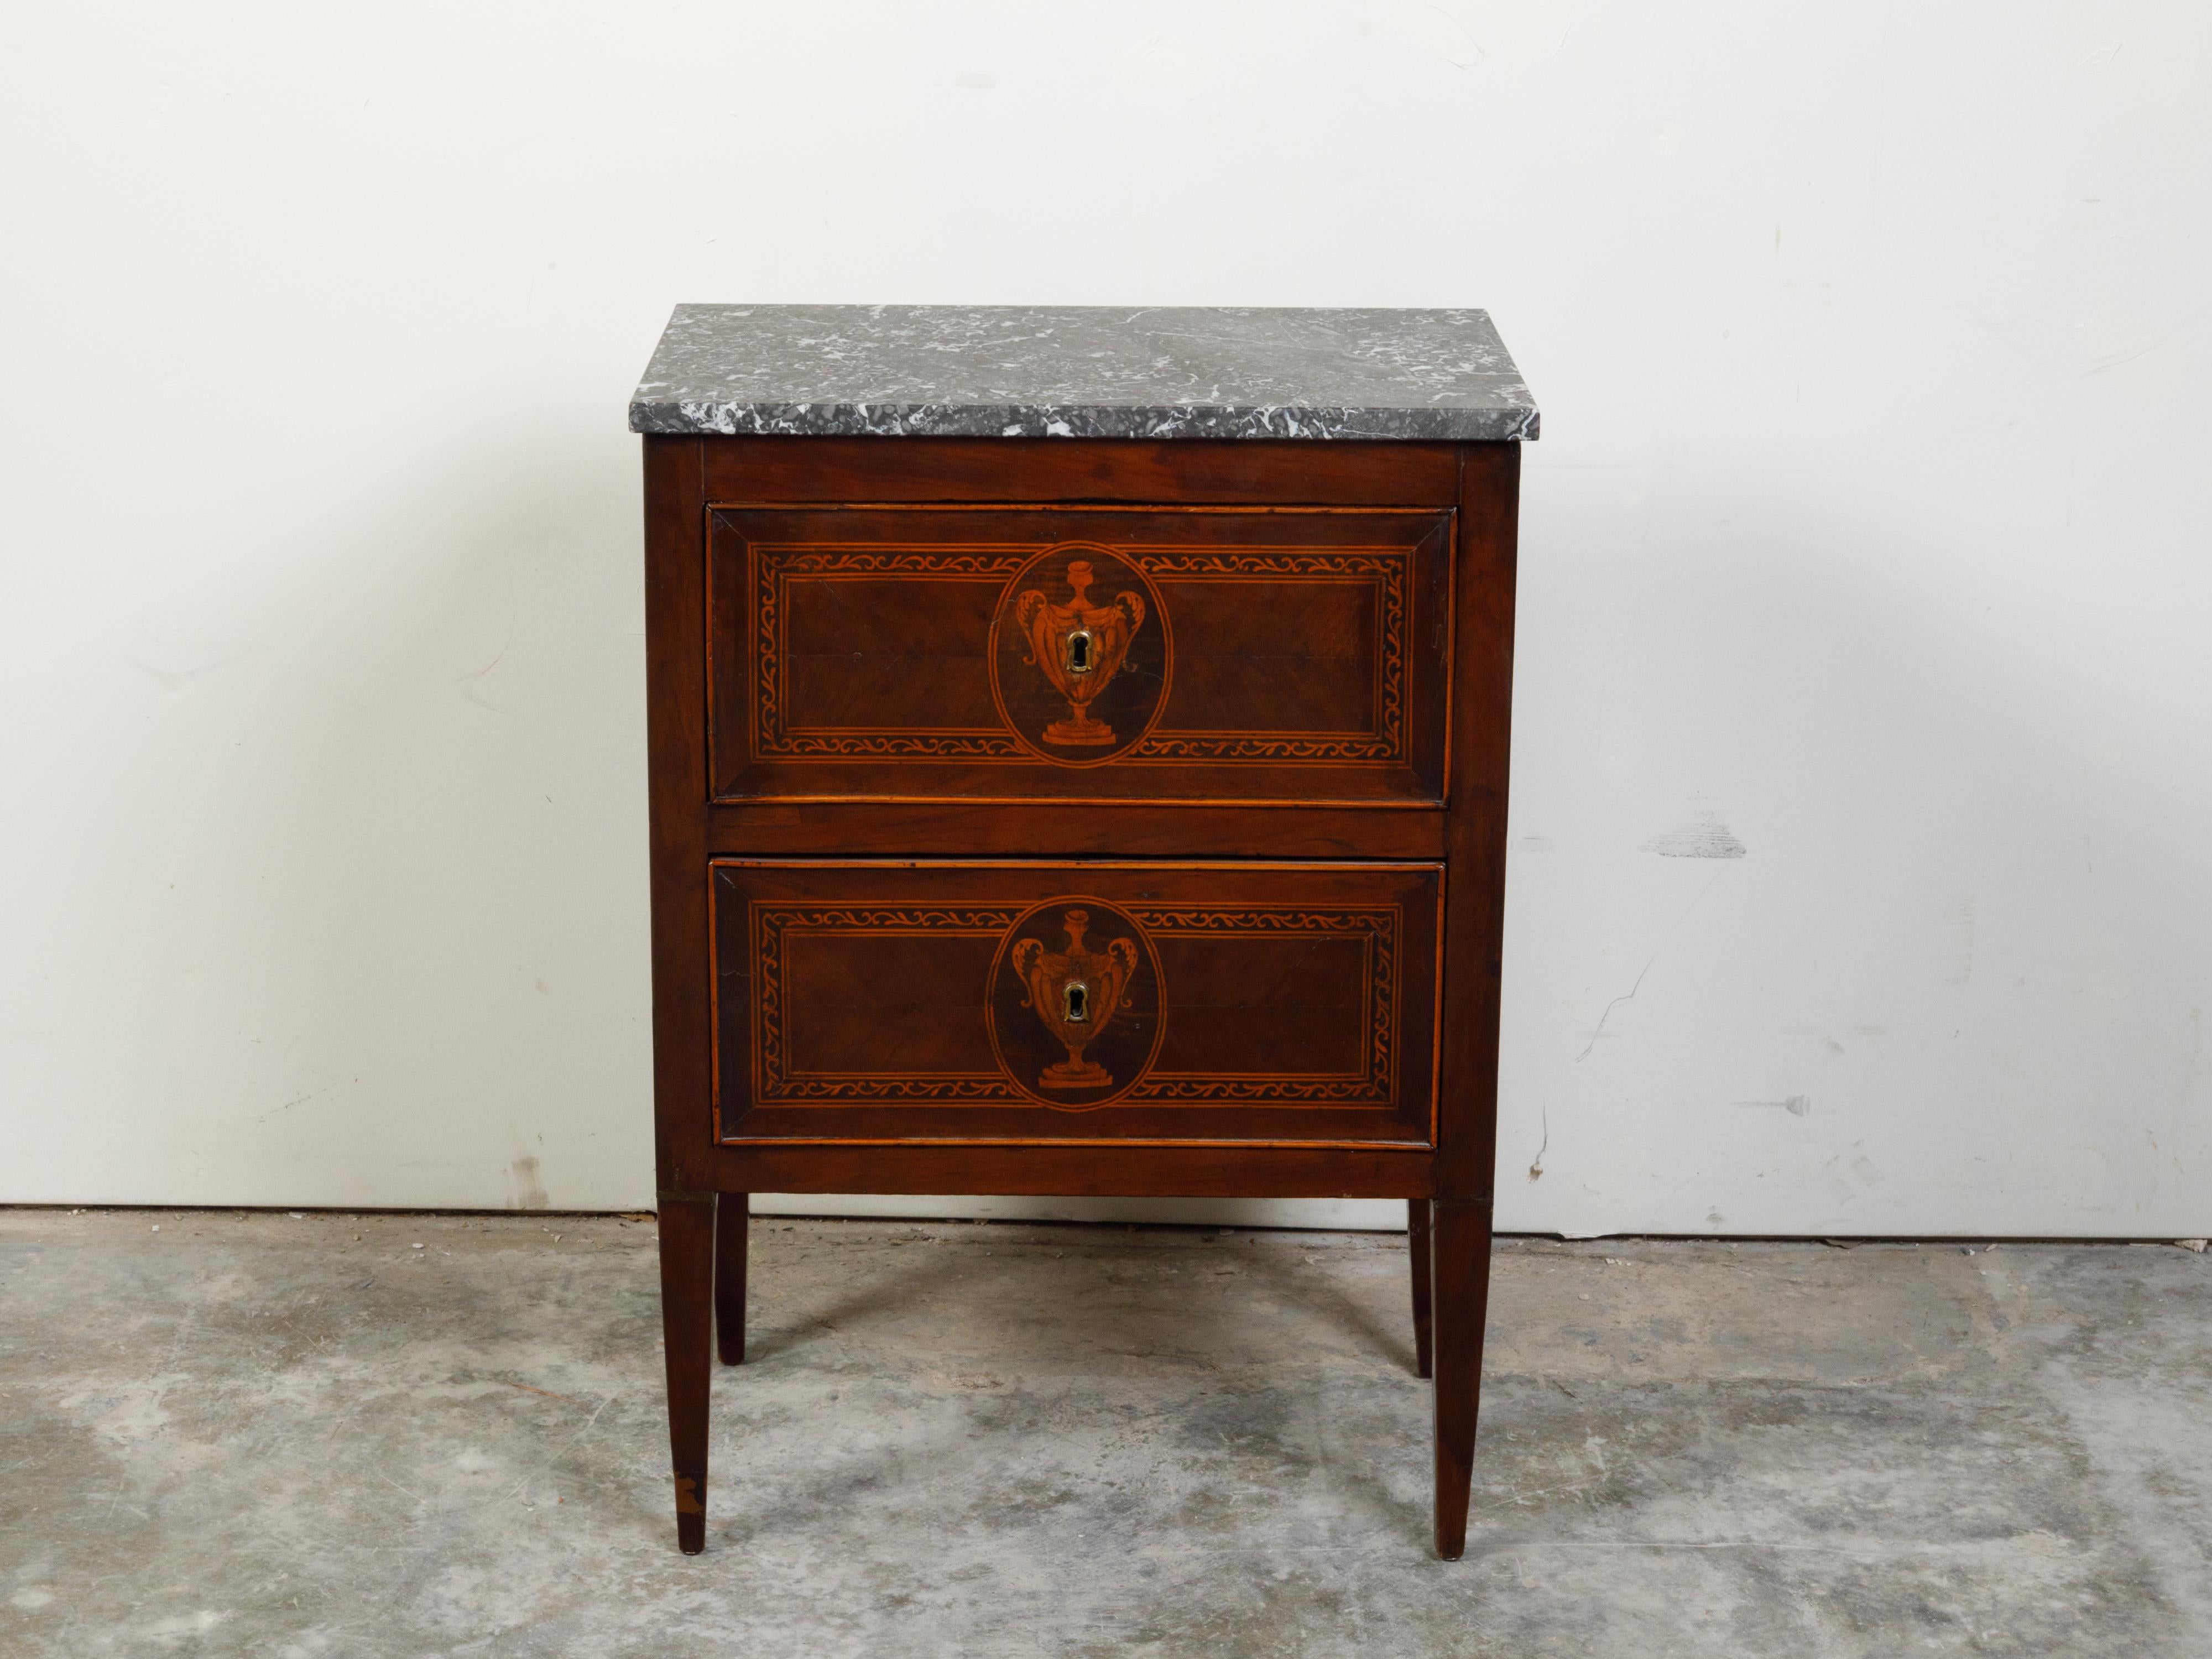 An Italian Neoclassical period walnut commode from the 18th century, with grey marble top and marquetry. Created in Italy during the 18th century, this petite Neoclassical walnut commode features a rectangular grey marble top sitting above two